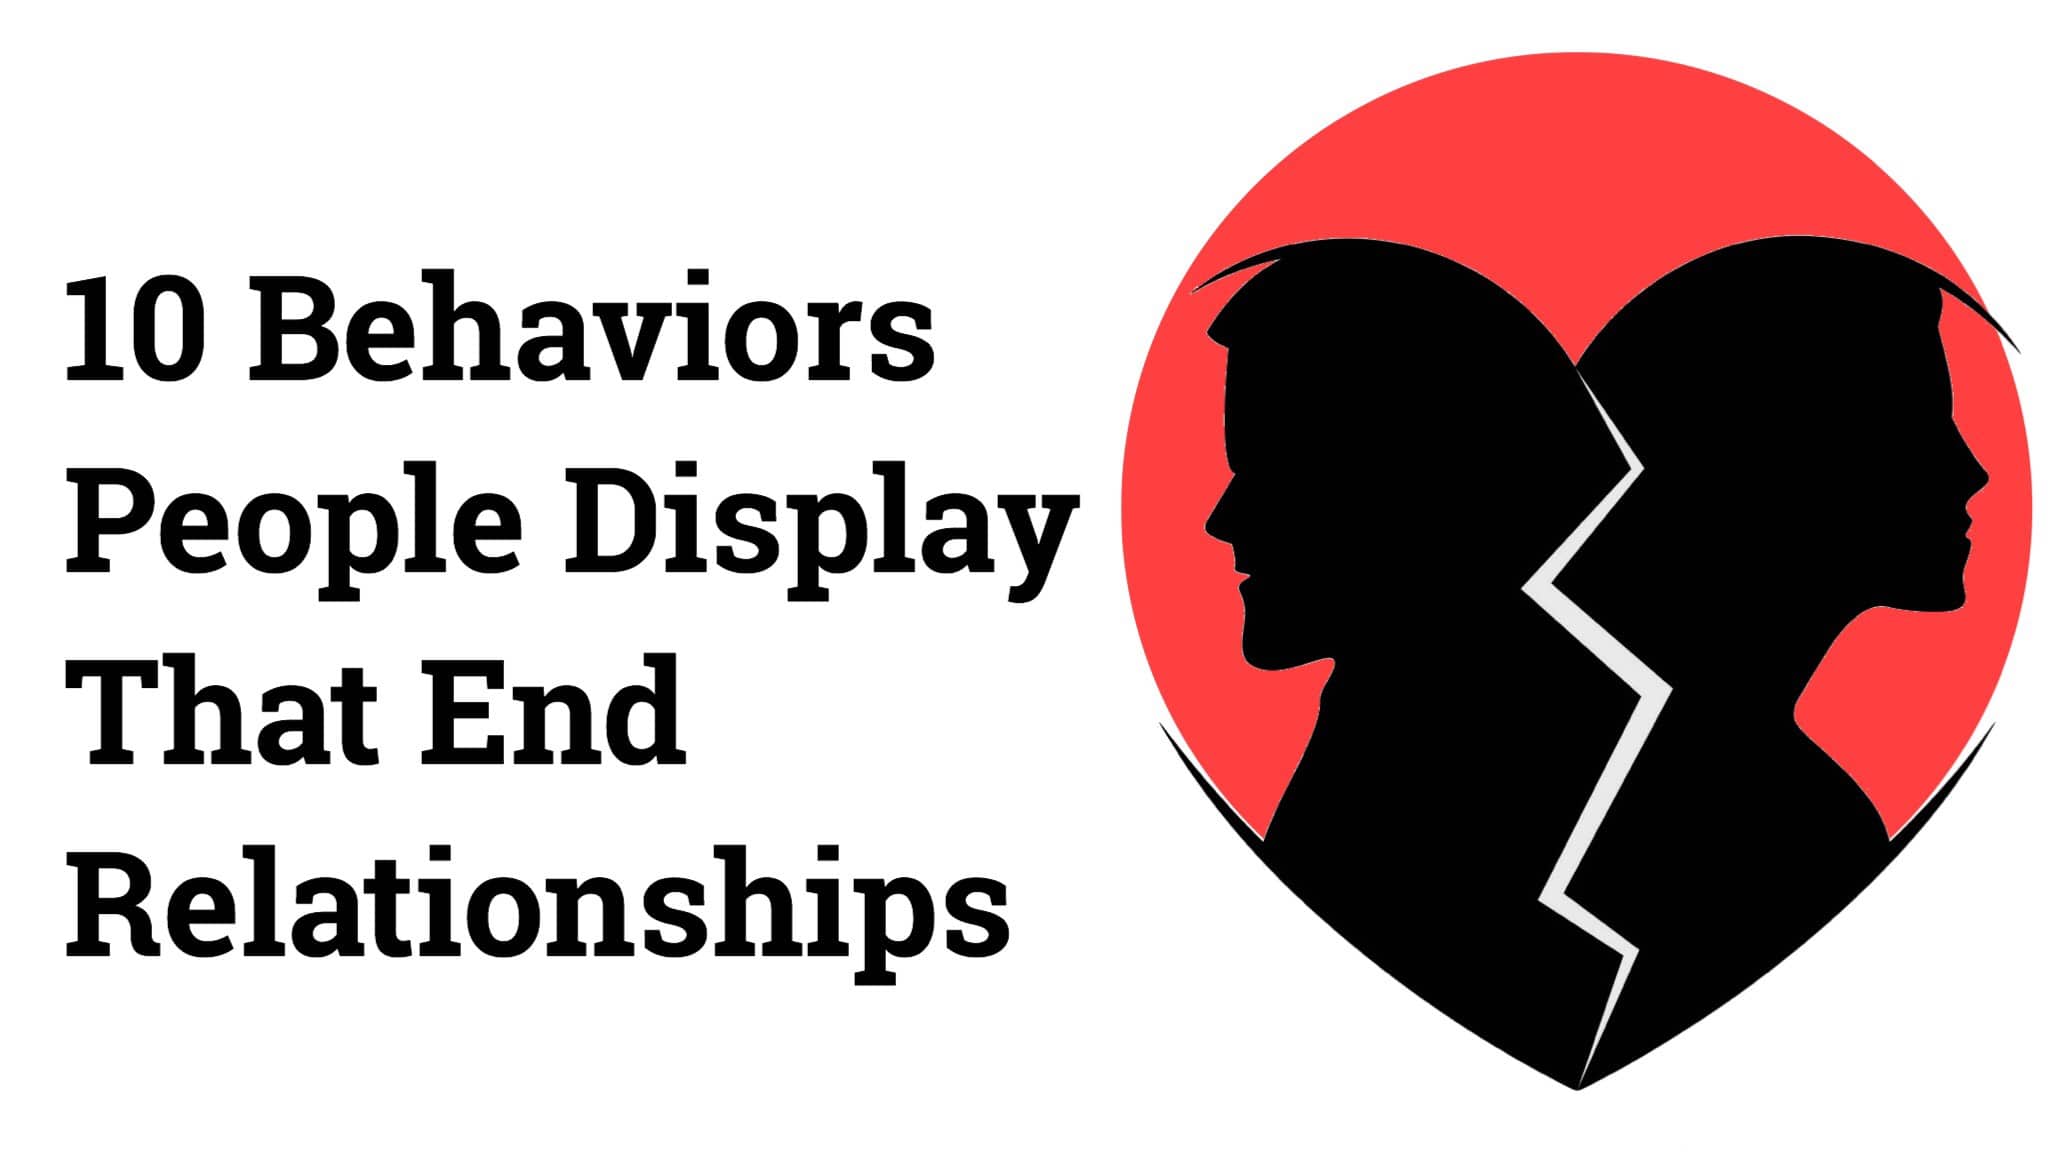 10 Behaviors People Display That End Relationships